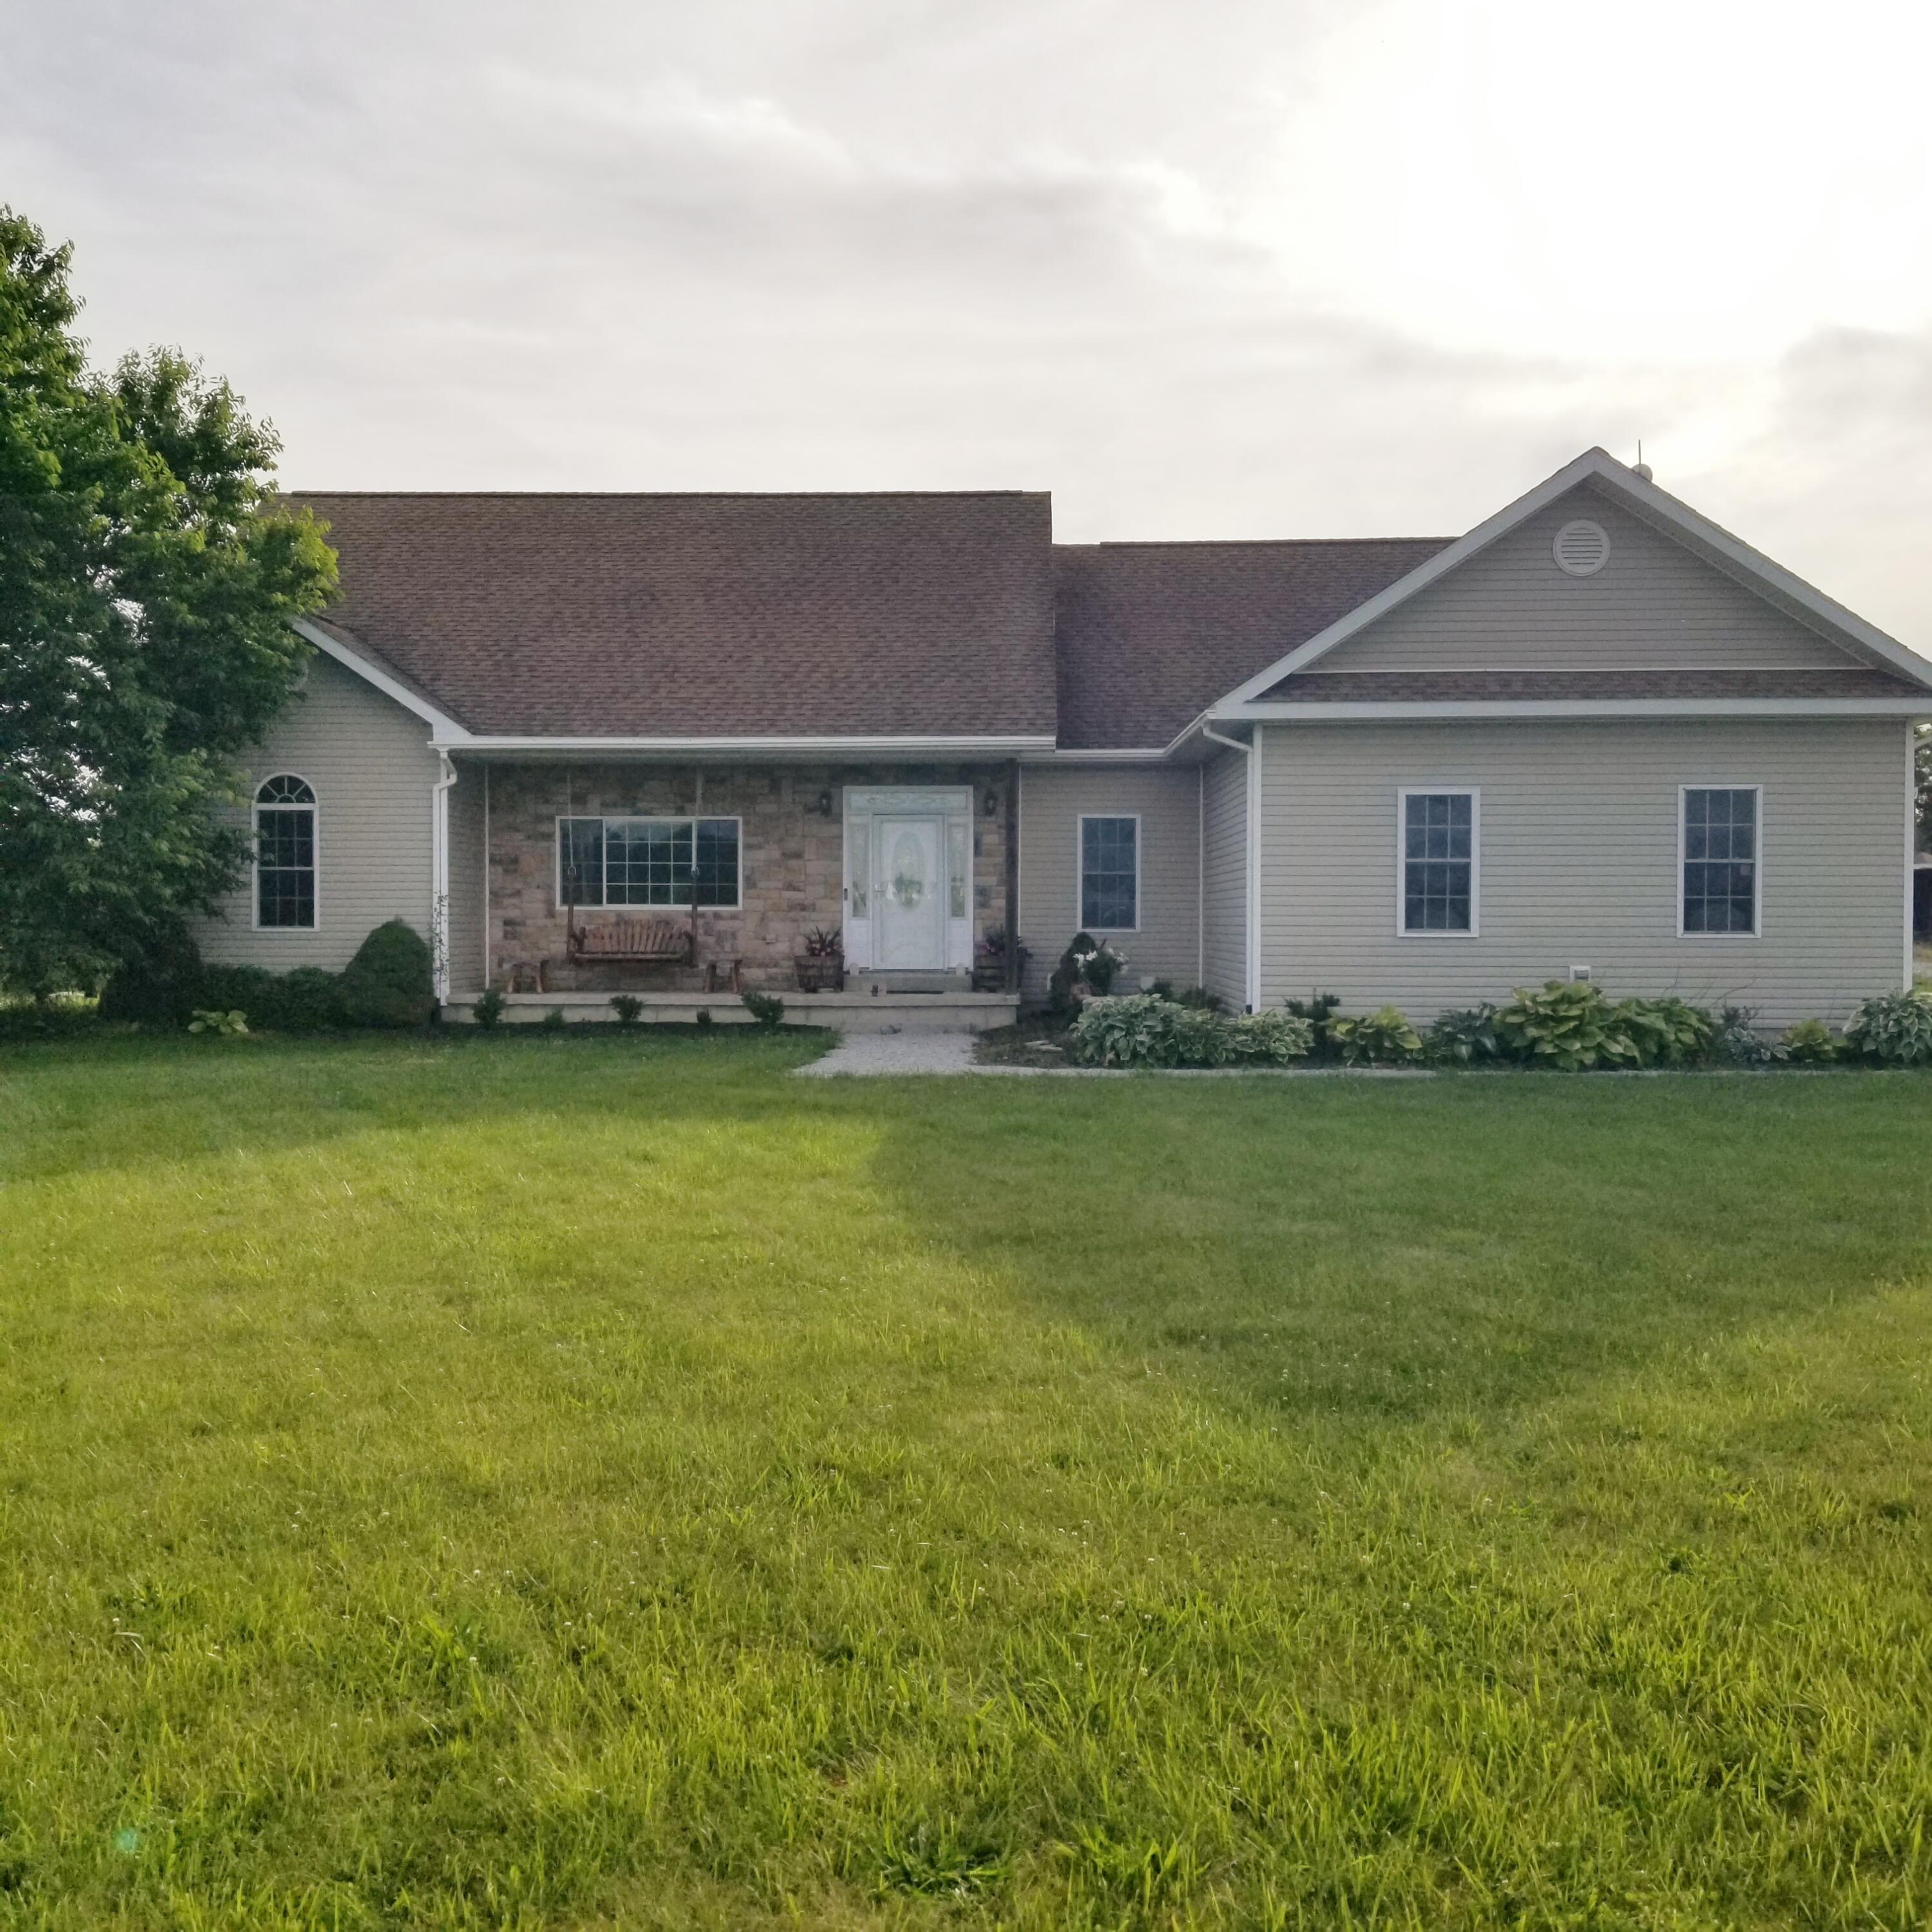 For Sale: 2128 Hidy Road NW, Jeffersonville, OH 43128 - Unreal Estate